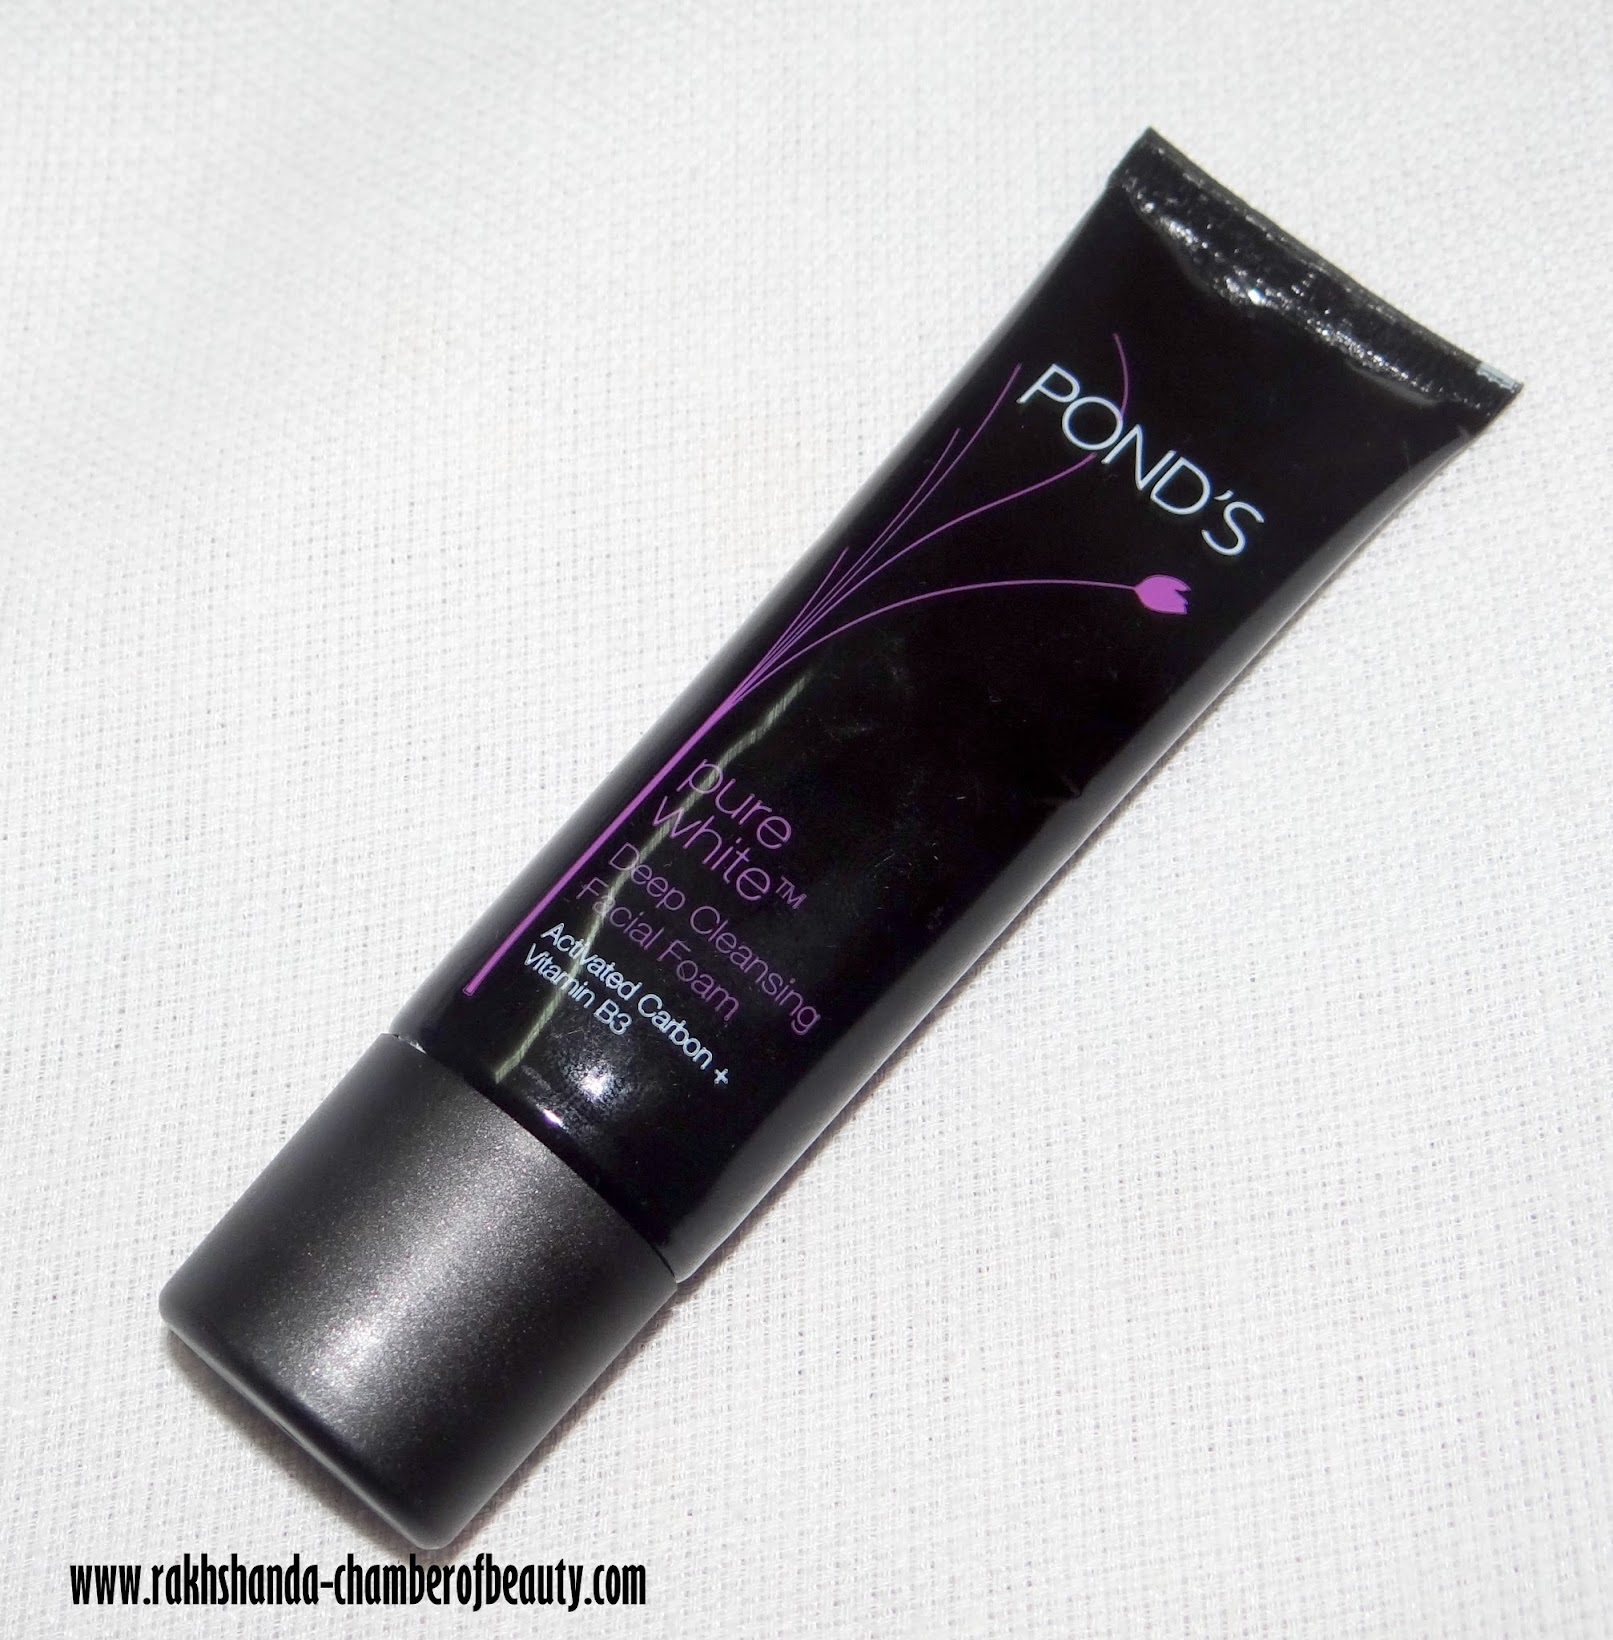 Pond's Pure White Deep Cleansing Facial Foam with Activated Carbon- review, Skincare products for combination/oily skin, Indian beauty blogger, Chamber of Beauty